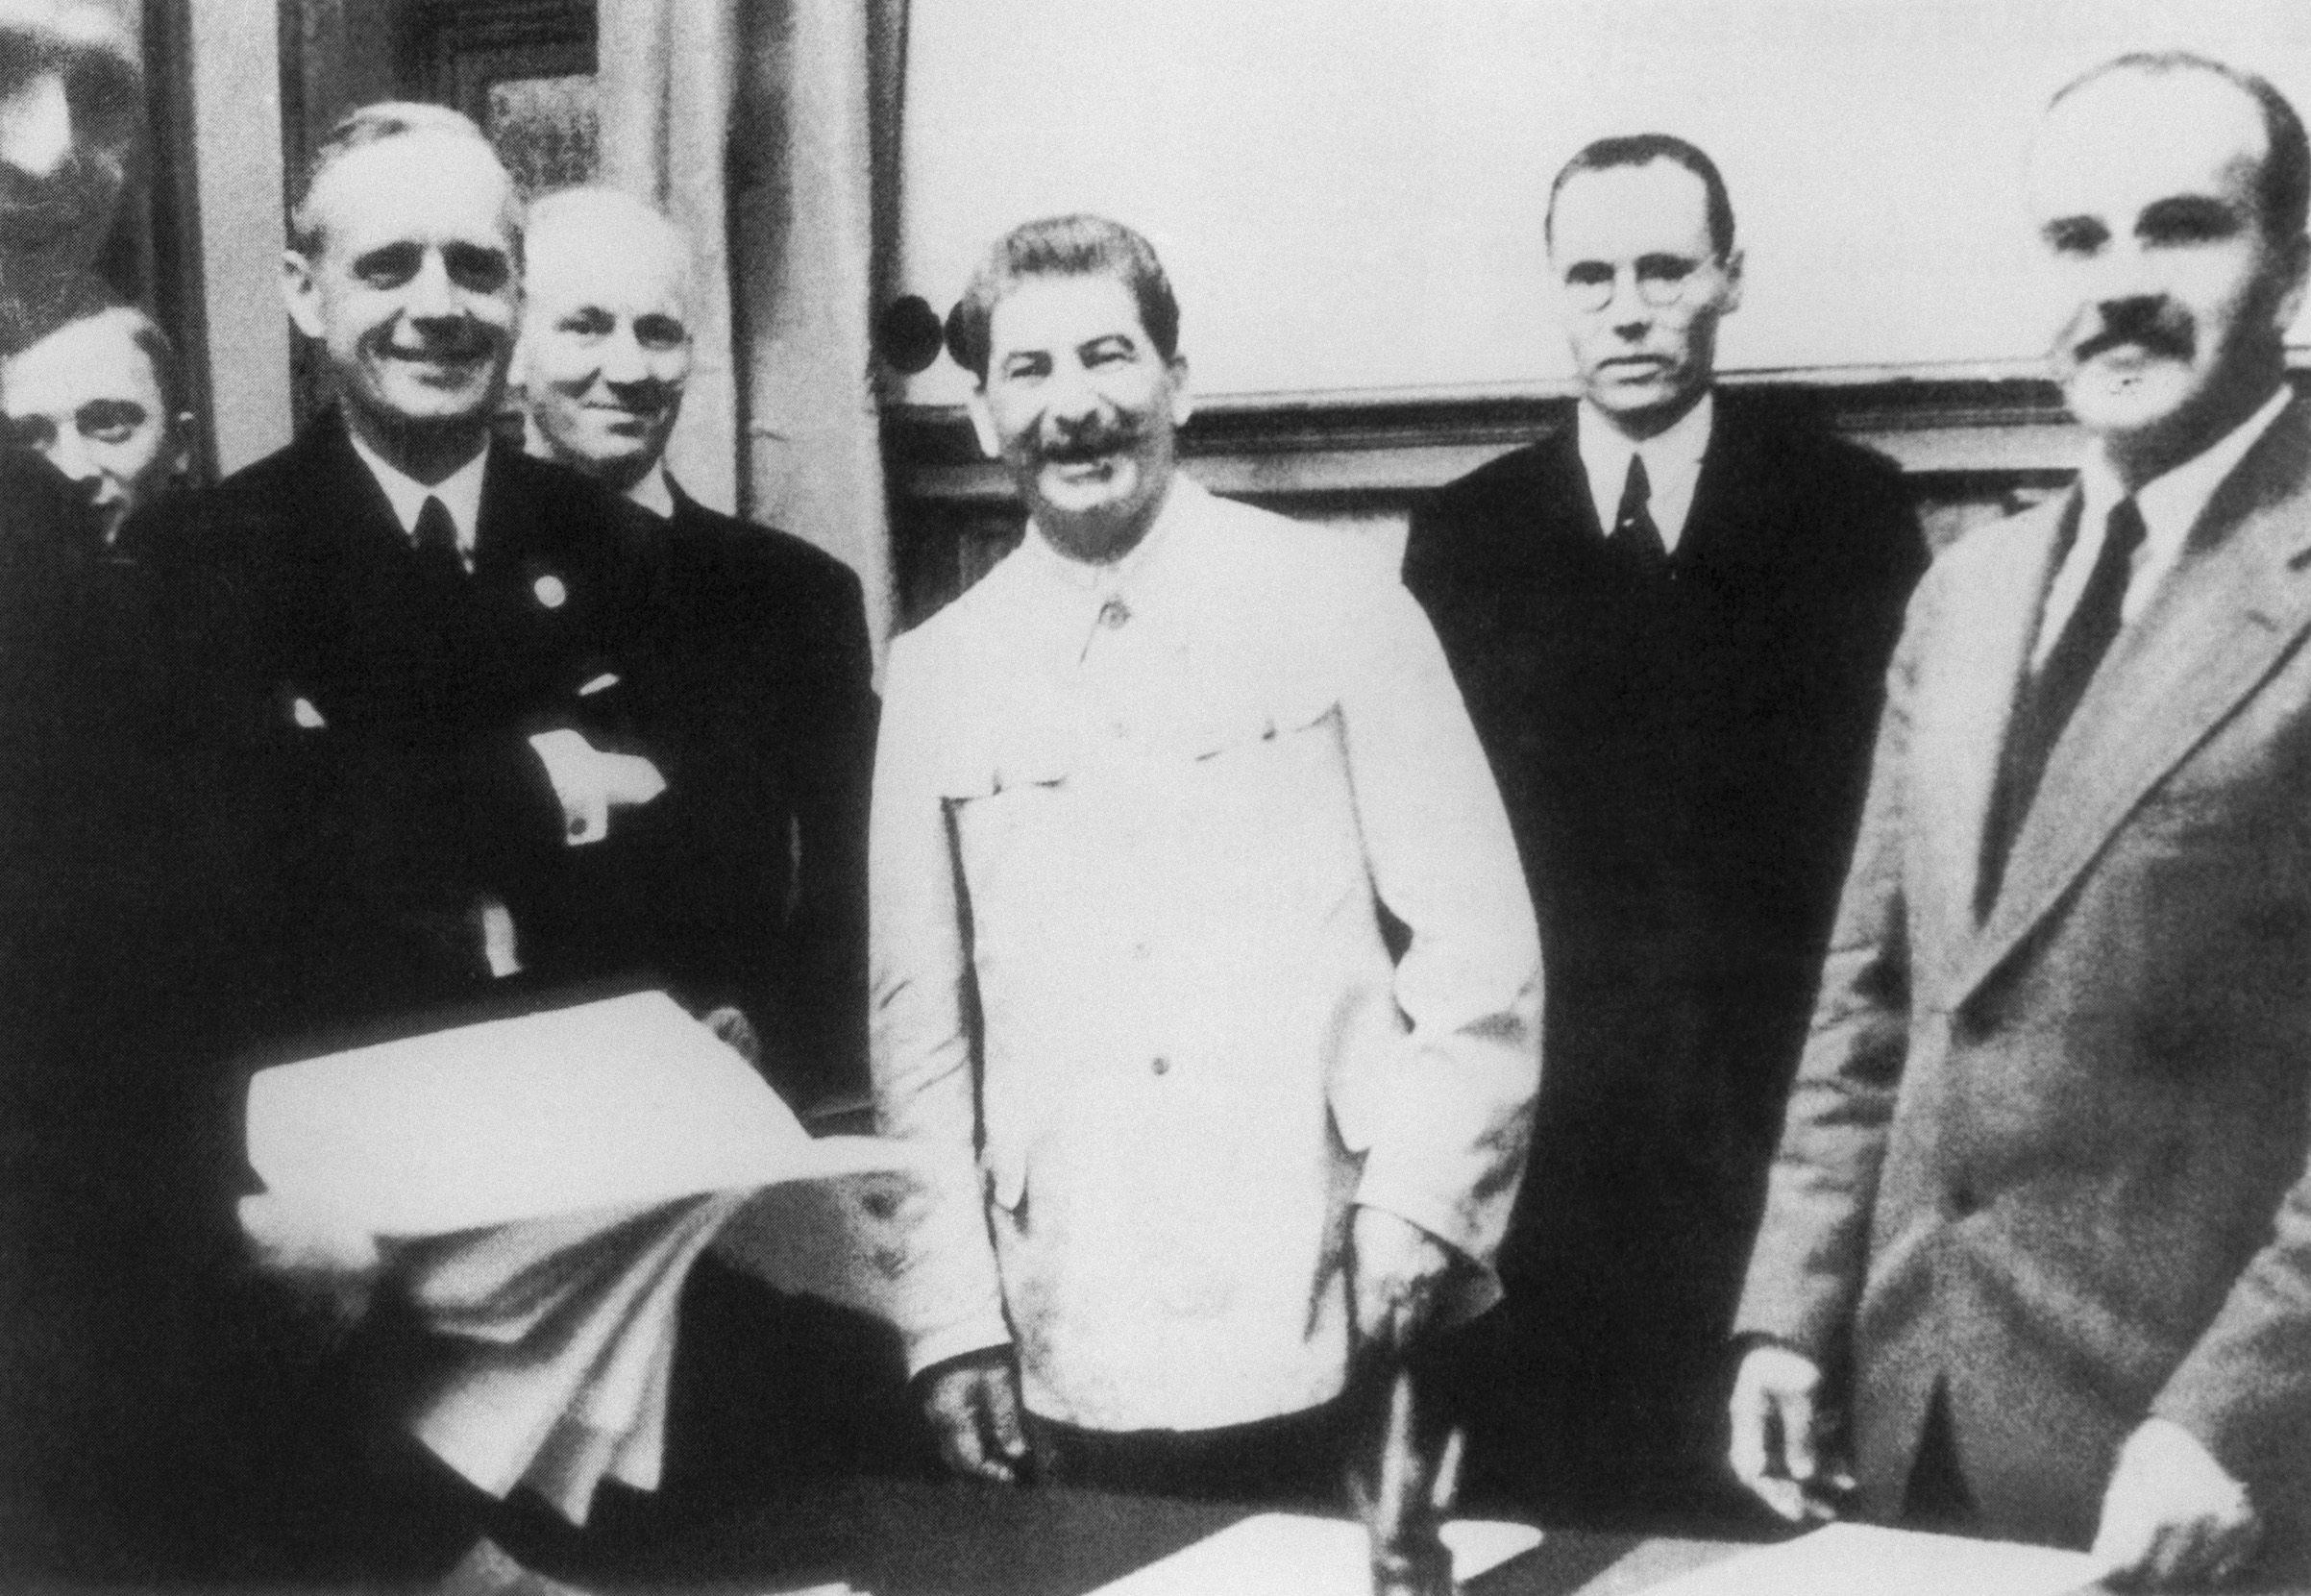 The Foreign Minister of Germany, Joachim von Ribbentrop, Soviet Leader Iosif (Joseph) Stalin and Soviet foreign minister Vyacheslav Molotov (foreground L-R) pose for a photo at the singing ceremony of the German-Soviet Treaty of Nonaggression, Aug. 23, 1939, in Moscow (TASS via Getty Images)